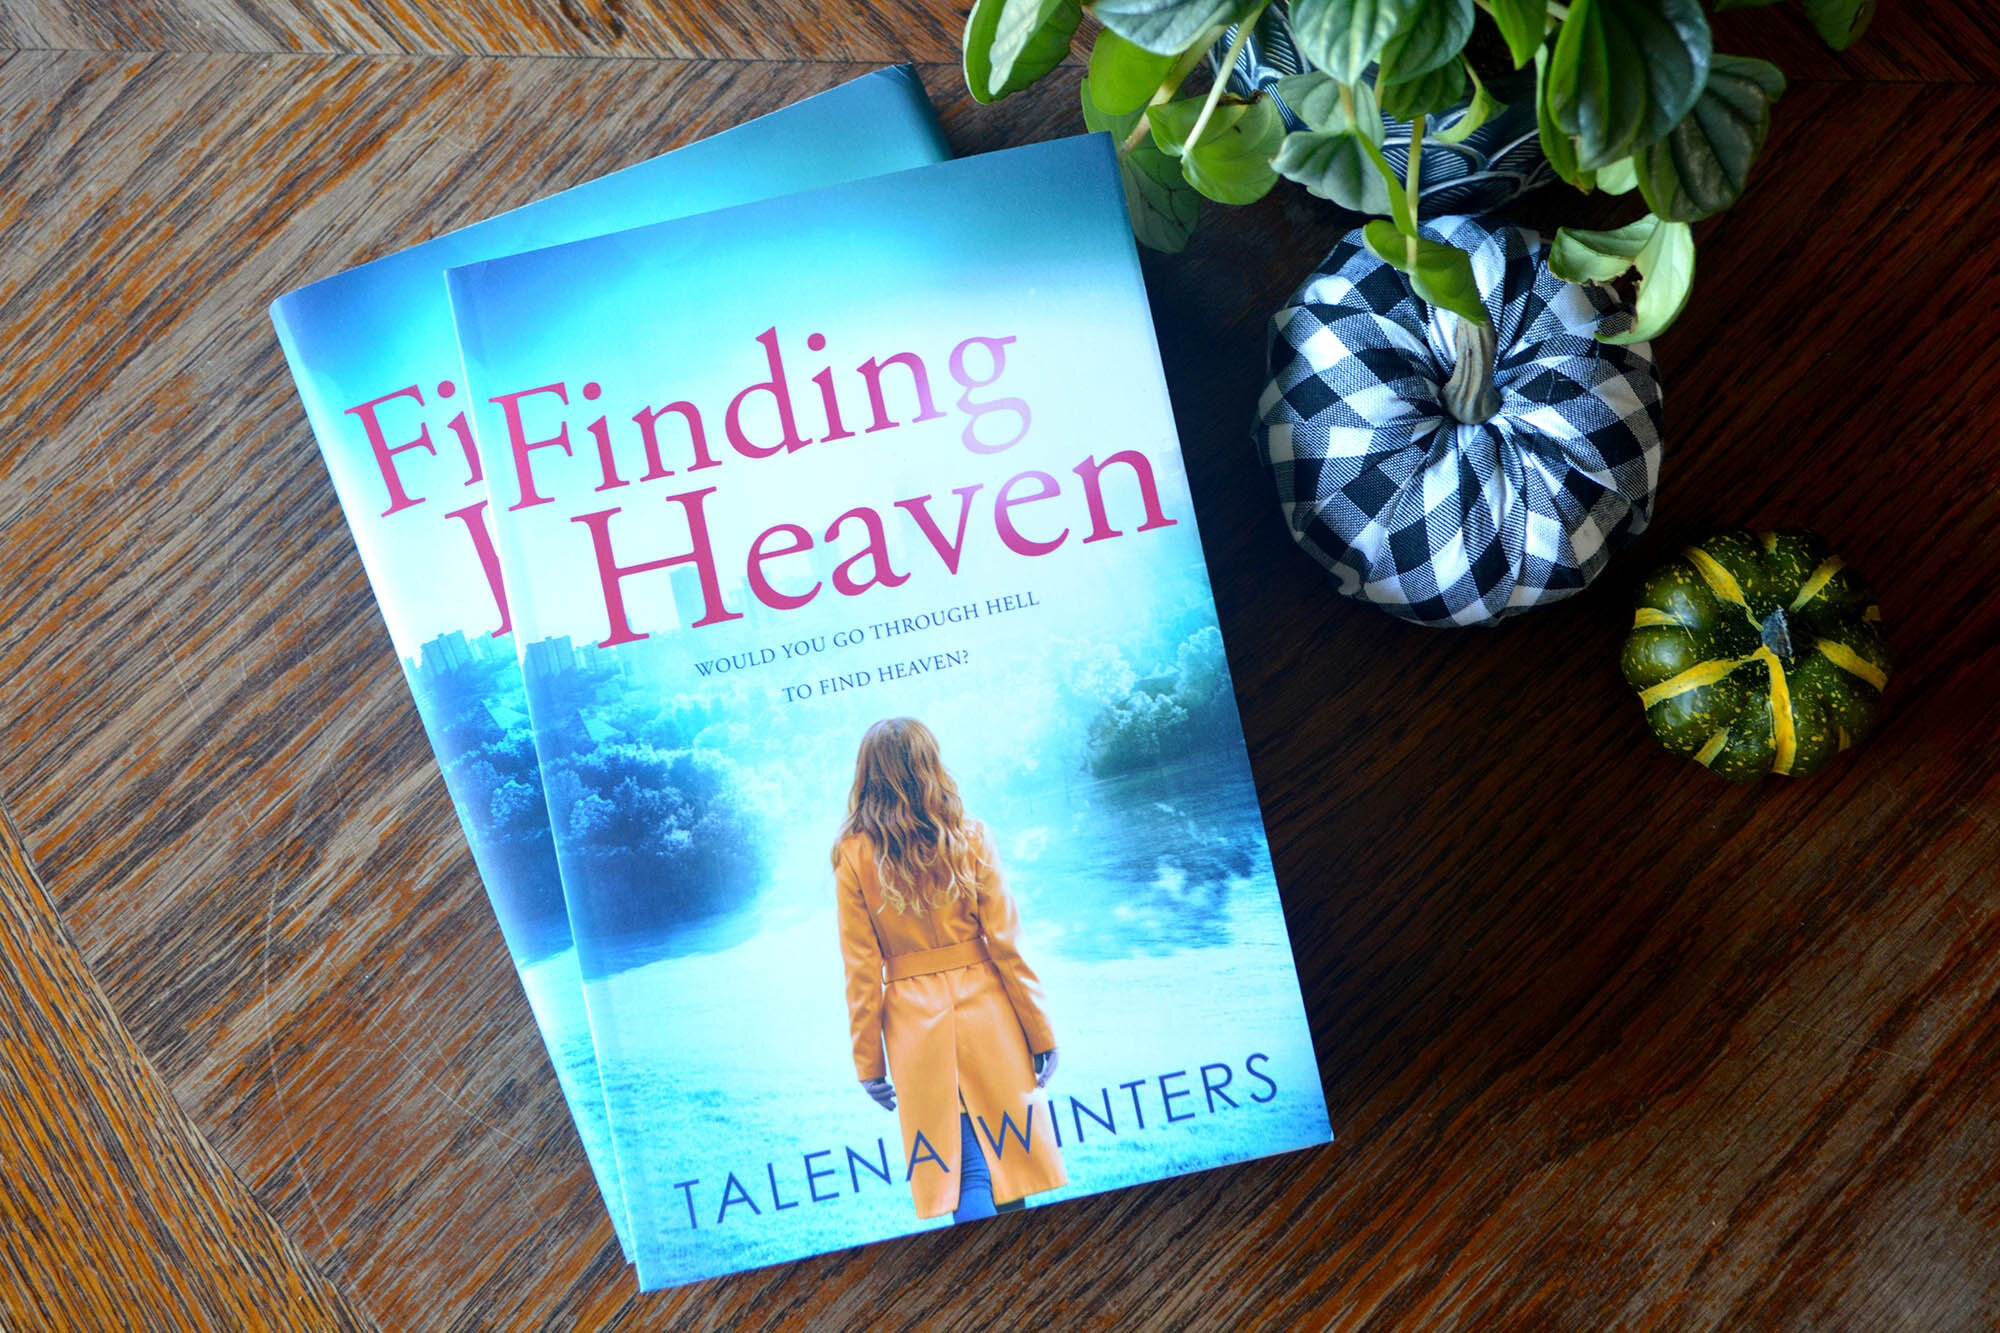  Top view of book stack of  Finding Heaven  by Talena Winters. New cover edition now available in hardcover and paperback. “Would you go through hell to find heaven?” 